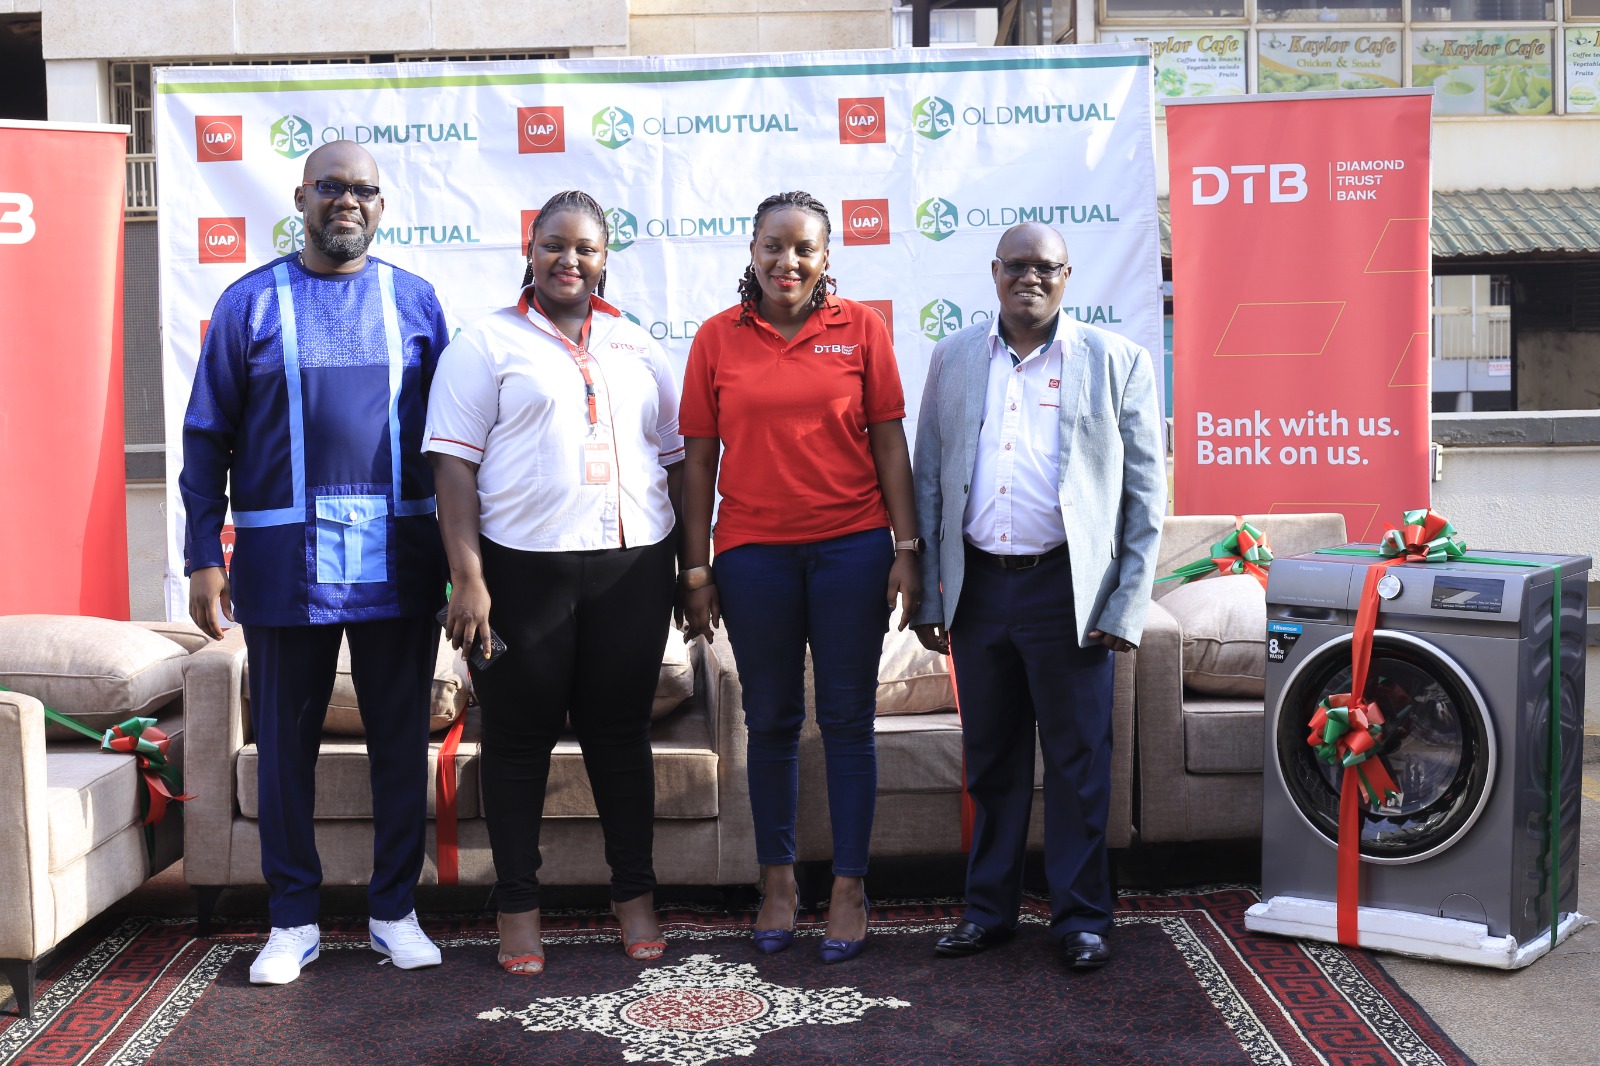 DTB and Old Mutual